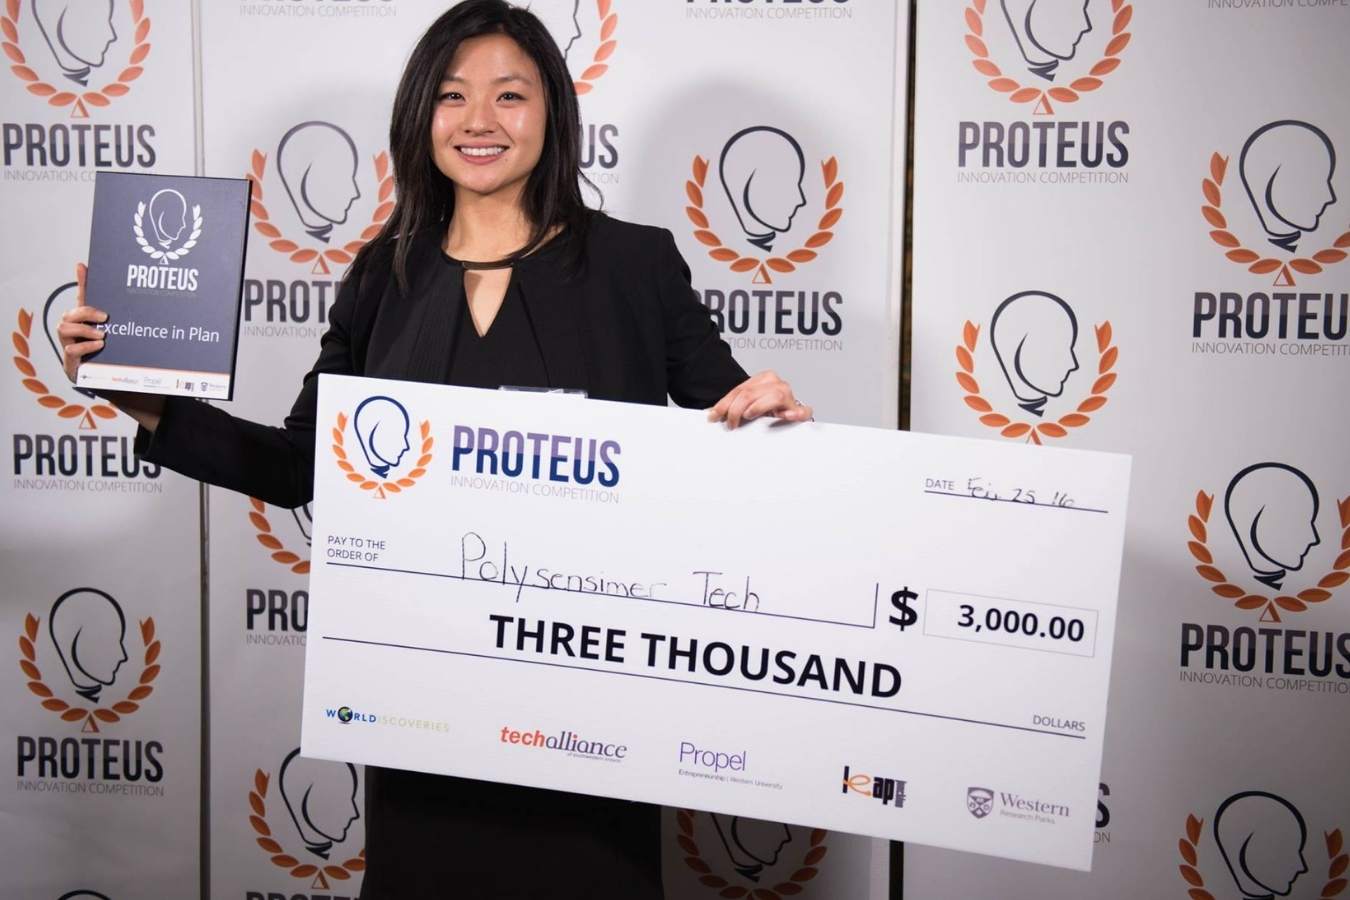 Proteus 2016 Competition Winner